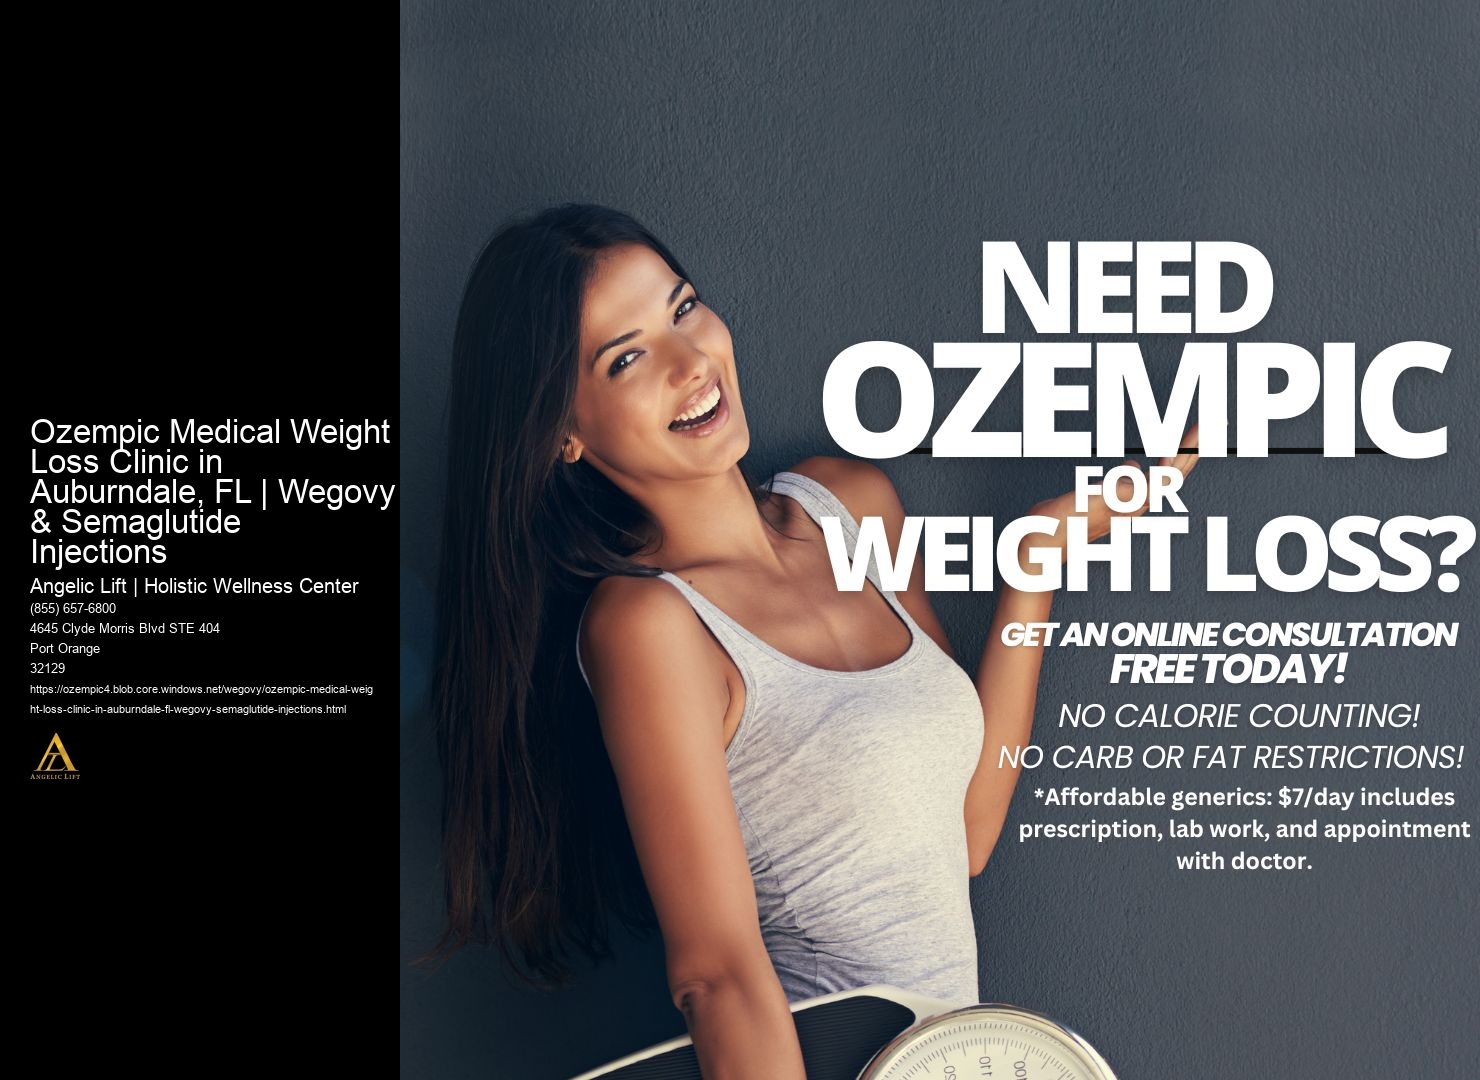 Ozempic Medical Weight Loss Clinic in Auburndale, FL | Wegovy & Semaglutide Injections